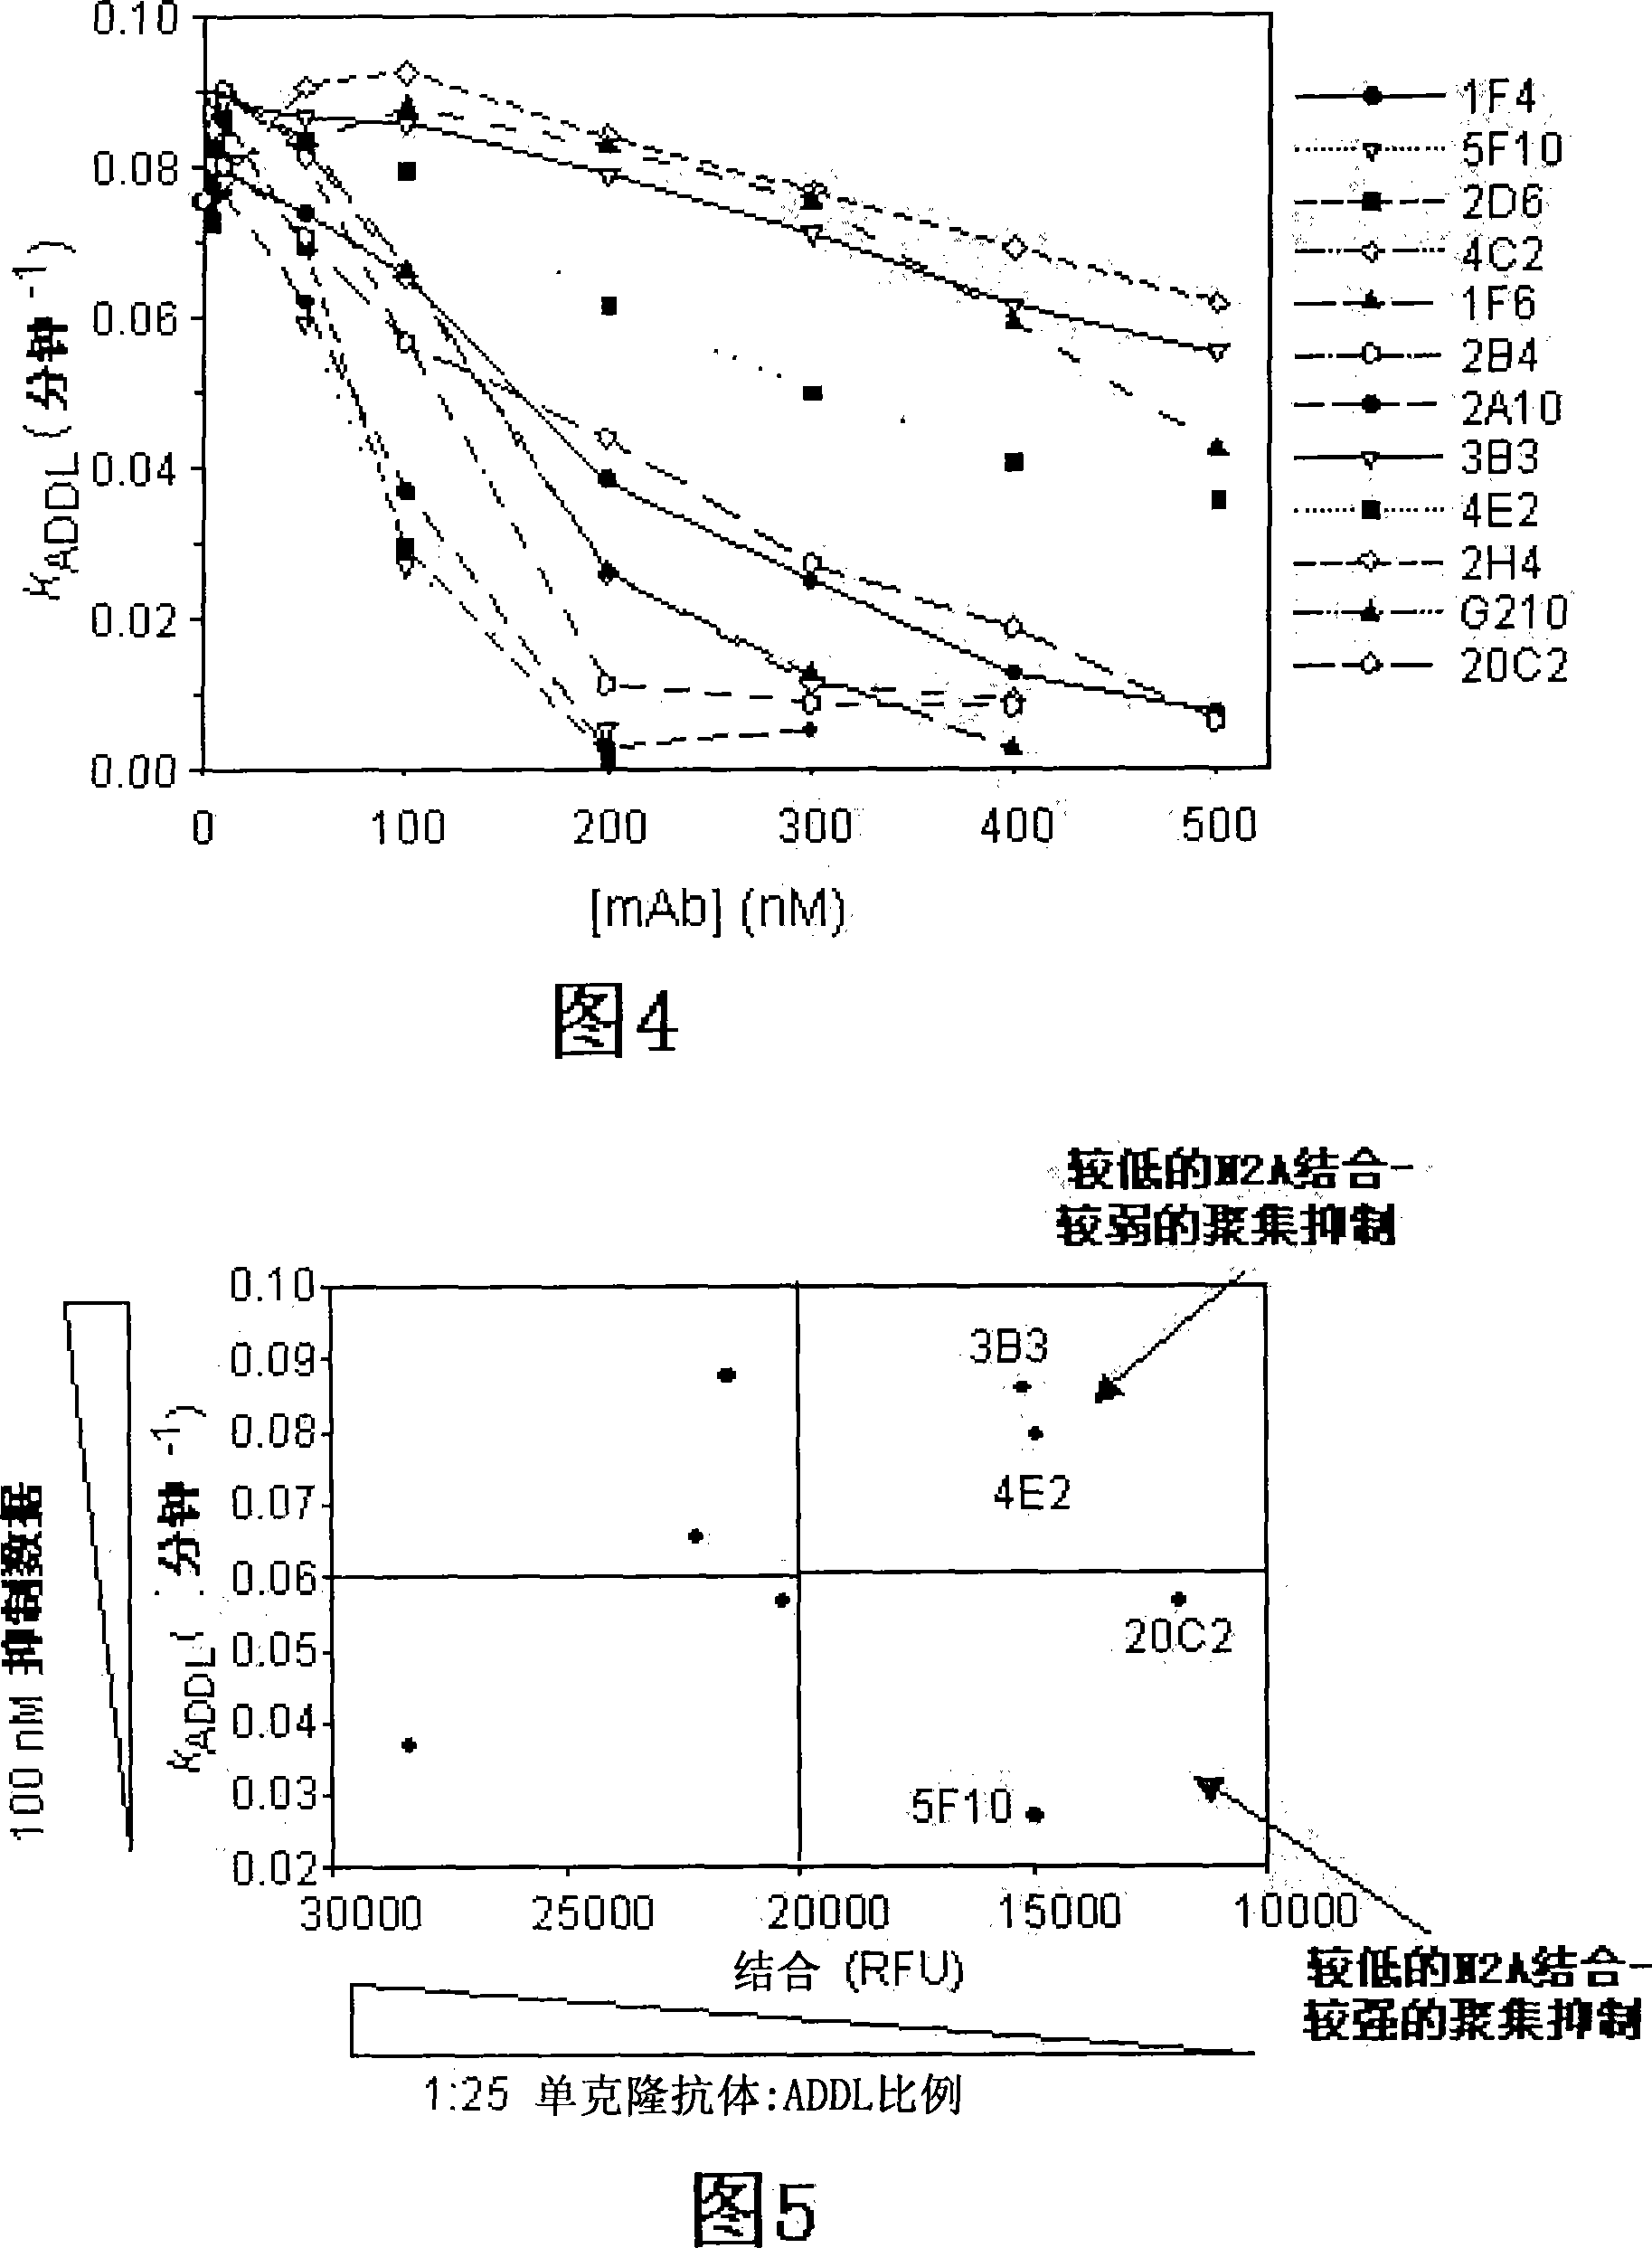 Anti-addl antibodies and uses thereof